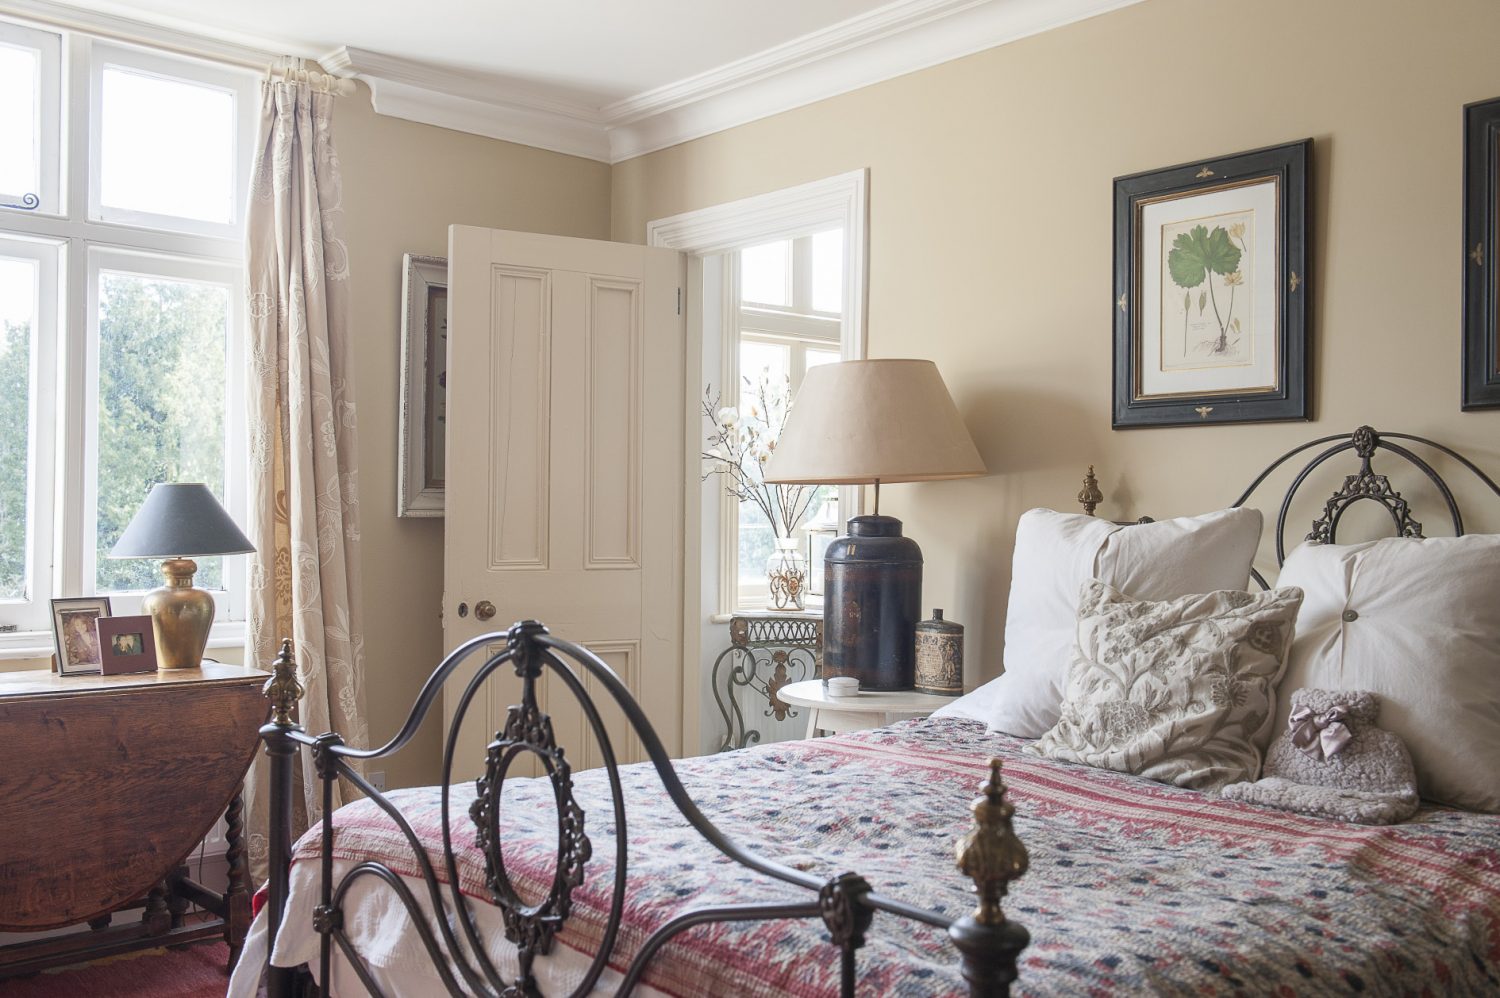 The second guest bedroom is ‘a nod to Jane Eyre’. “The first thing I did was paint the floor red. My friends thought I’d finally lost it,” says Emma.